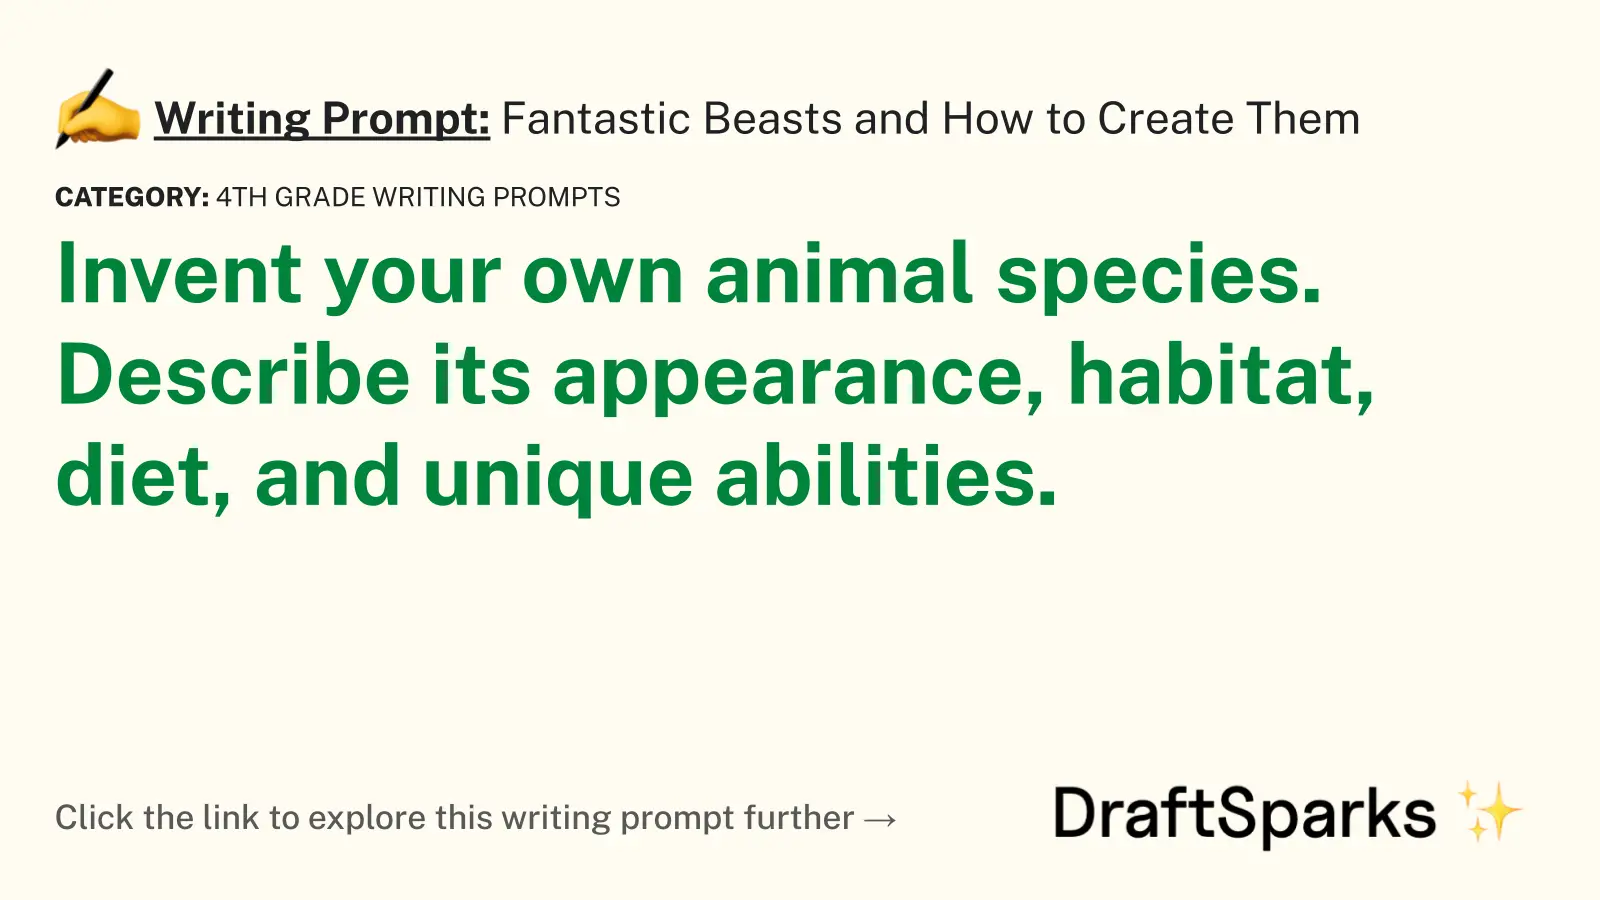 Fantastic Beasts and How to Create Them